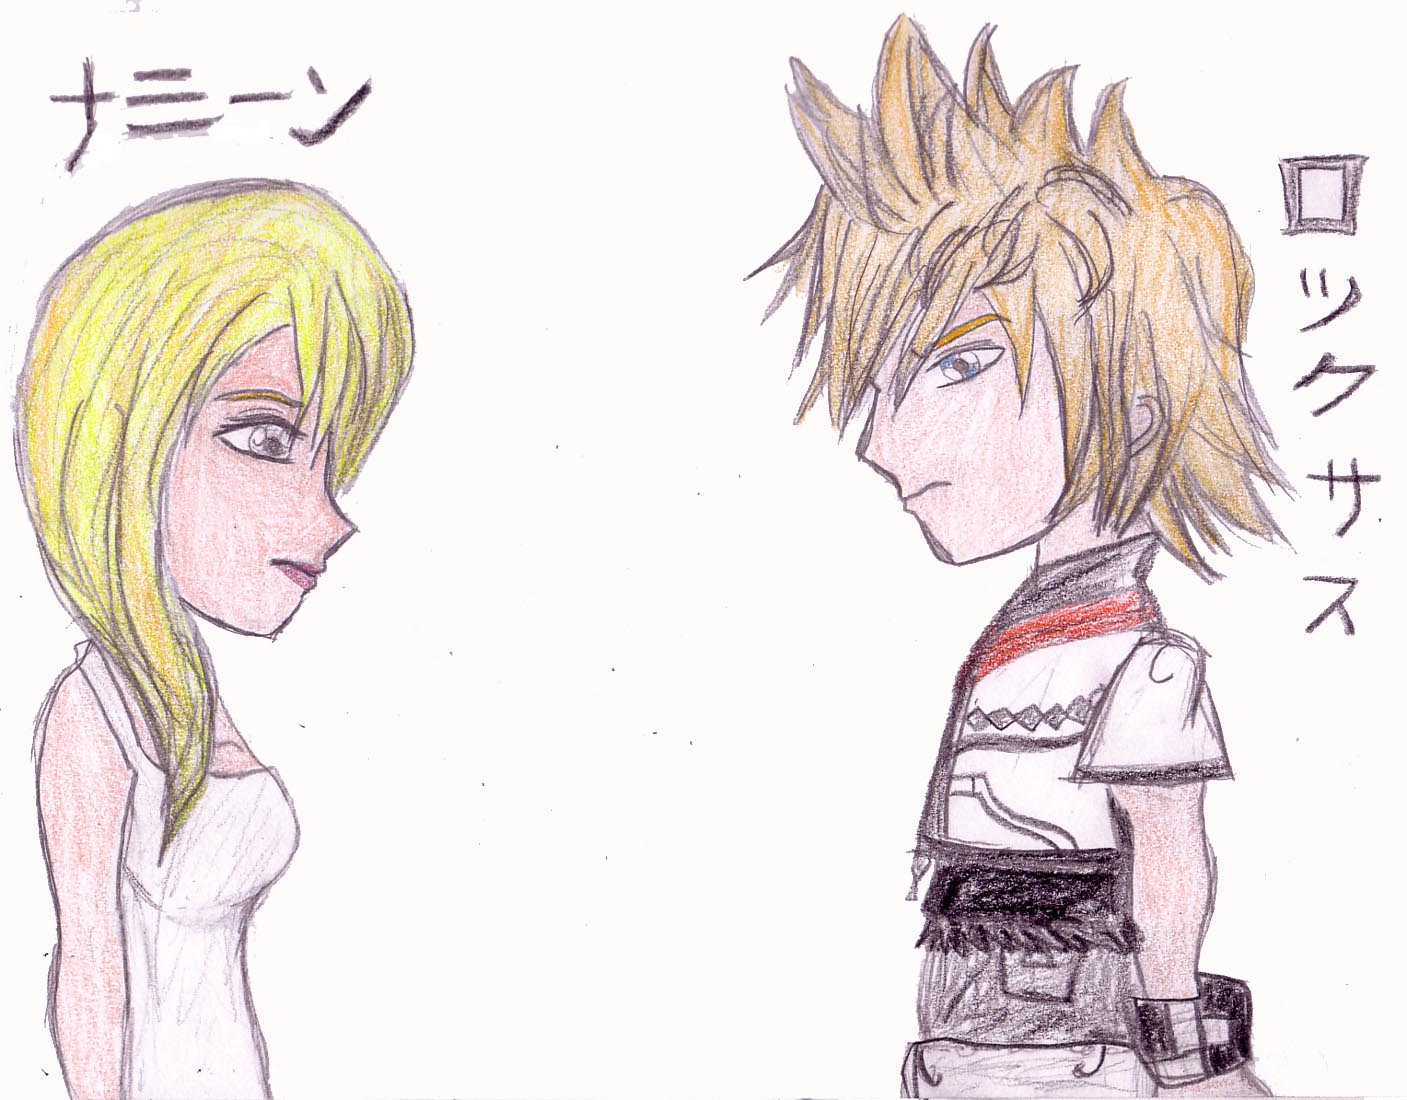 Waiting for fate that made me...*naminexroxas* by cyberkitty13